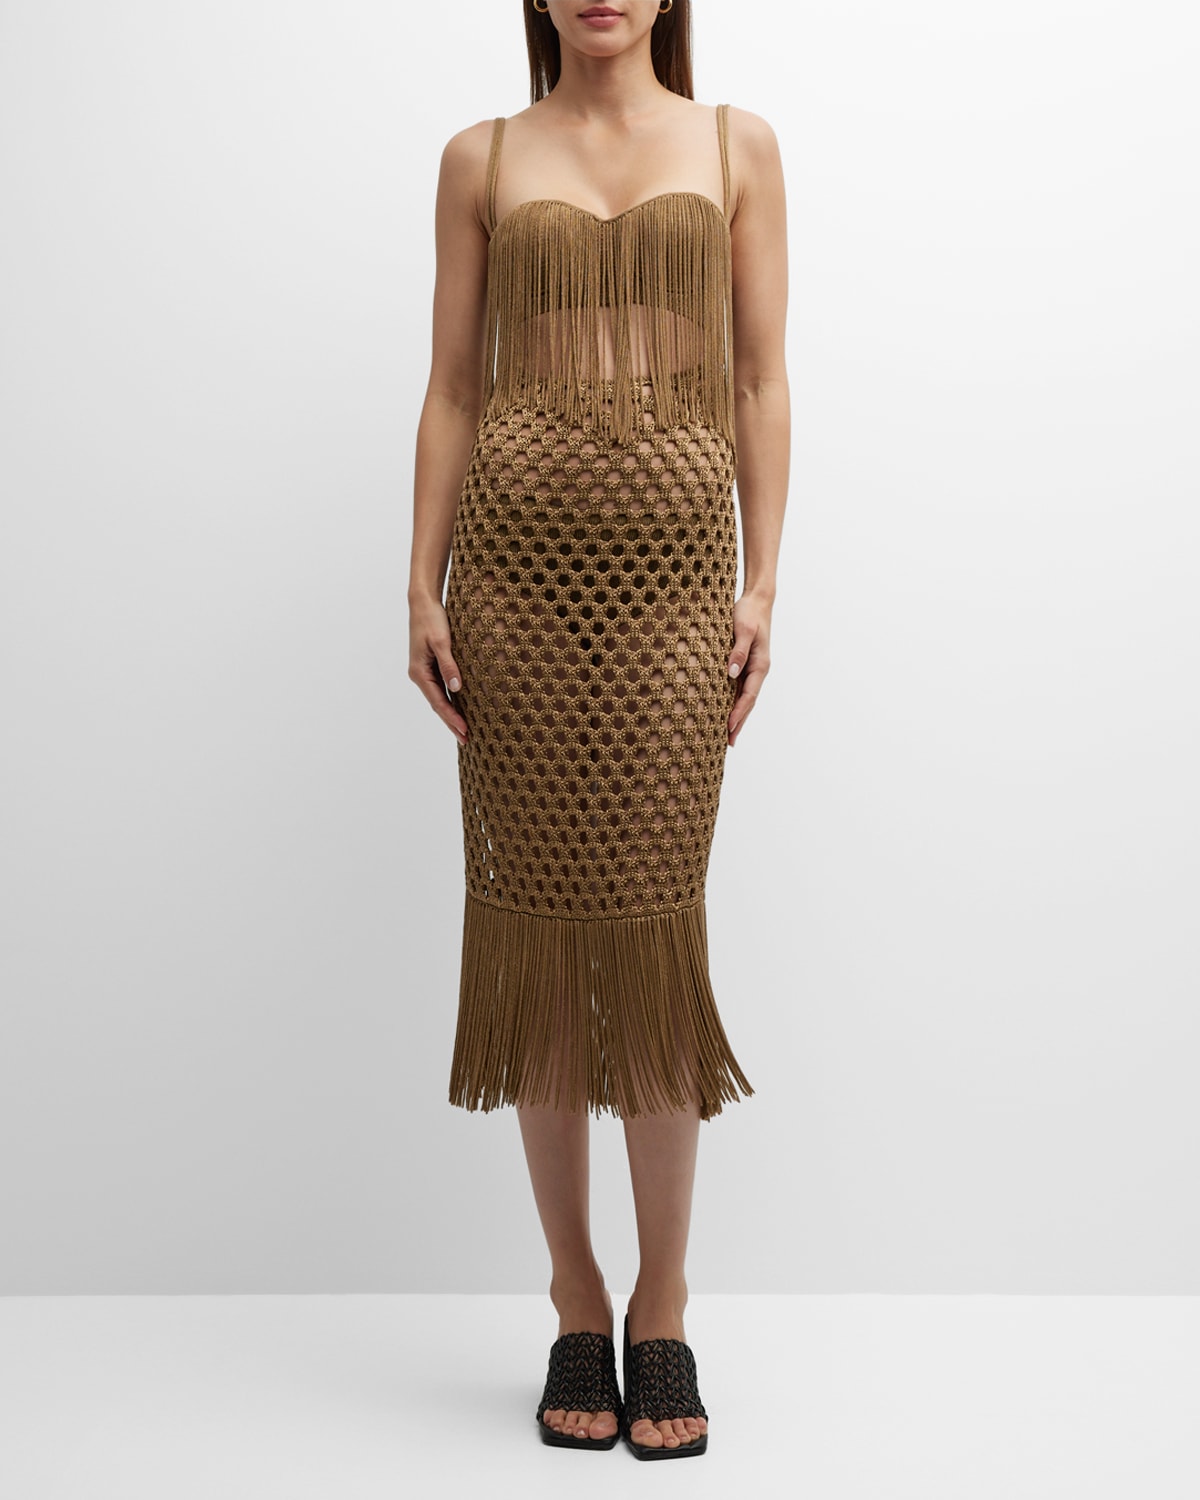 PROENZA SCHOULER LACQUERED MESH KNIT MIDI DRESS WITH FRINGE DETAIL